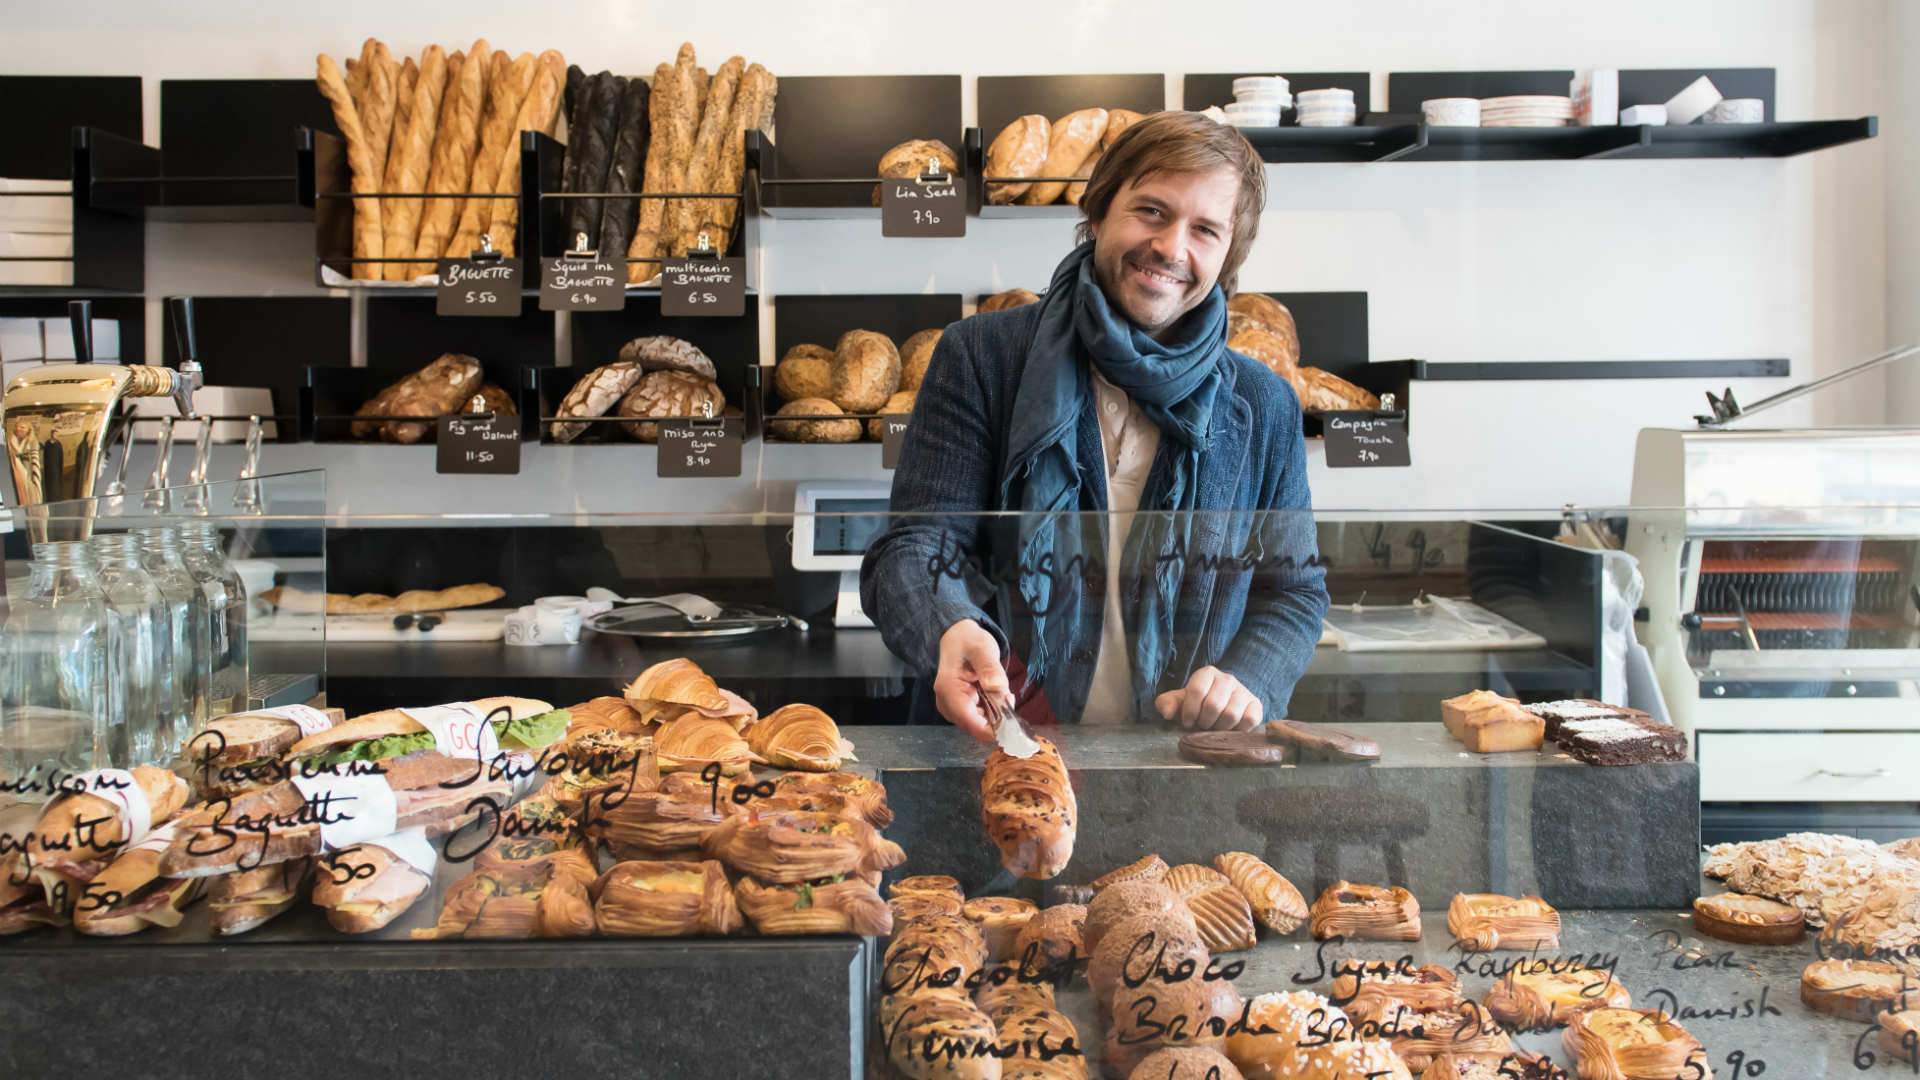 Gontran Cherrier Has Expanded His Baked Goods Empire to Hawthorn